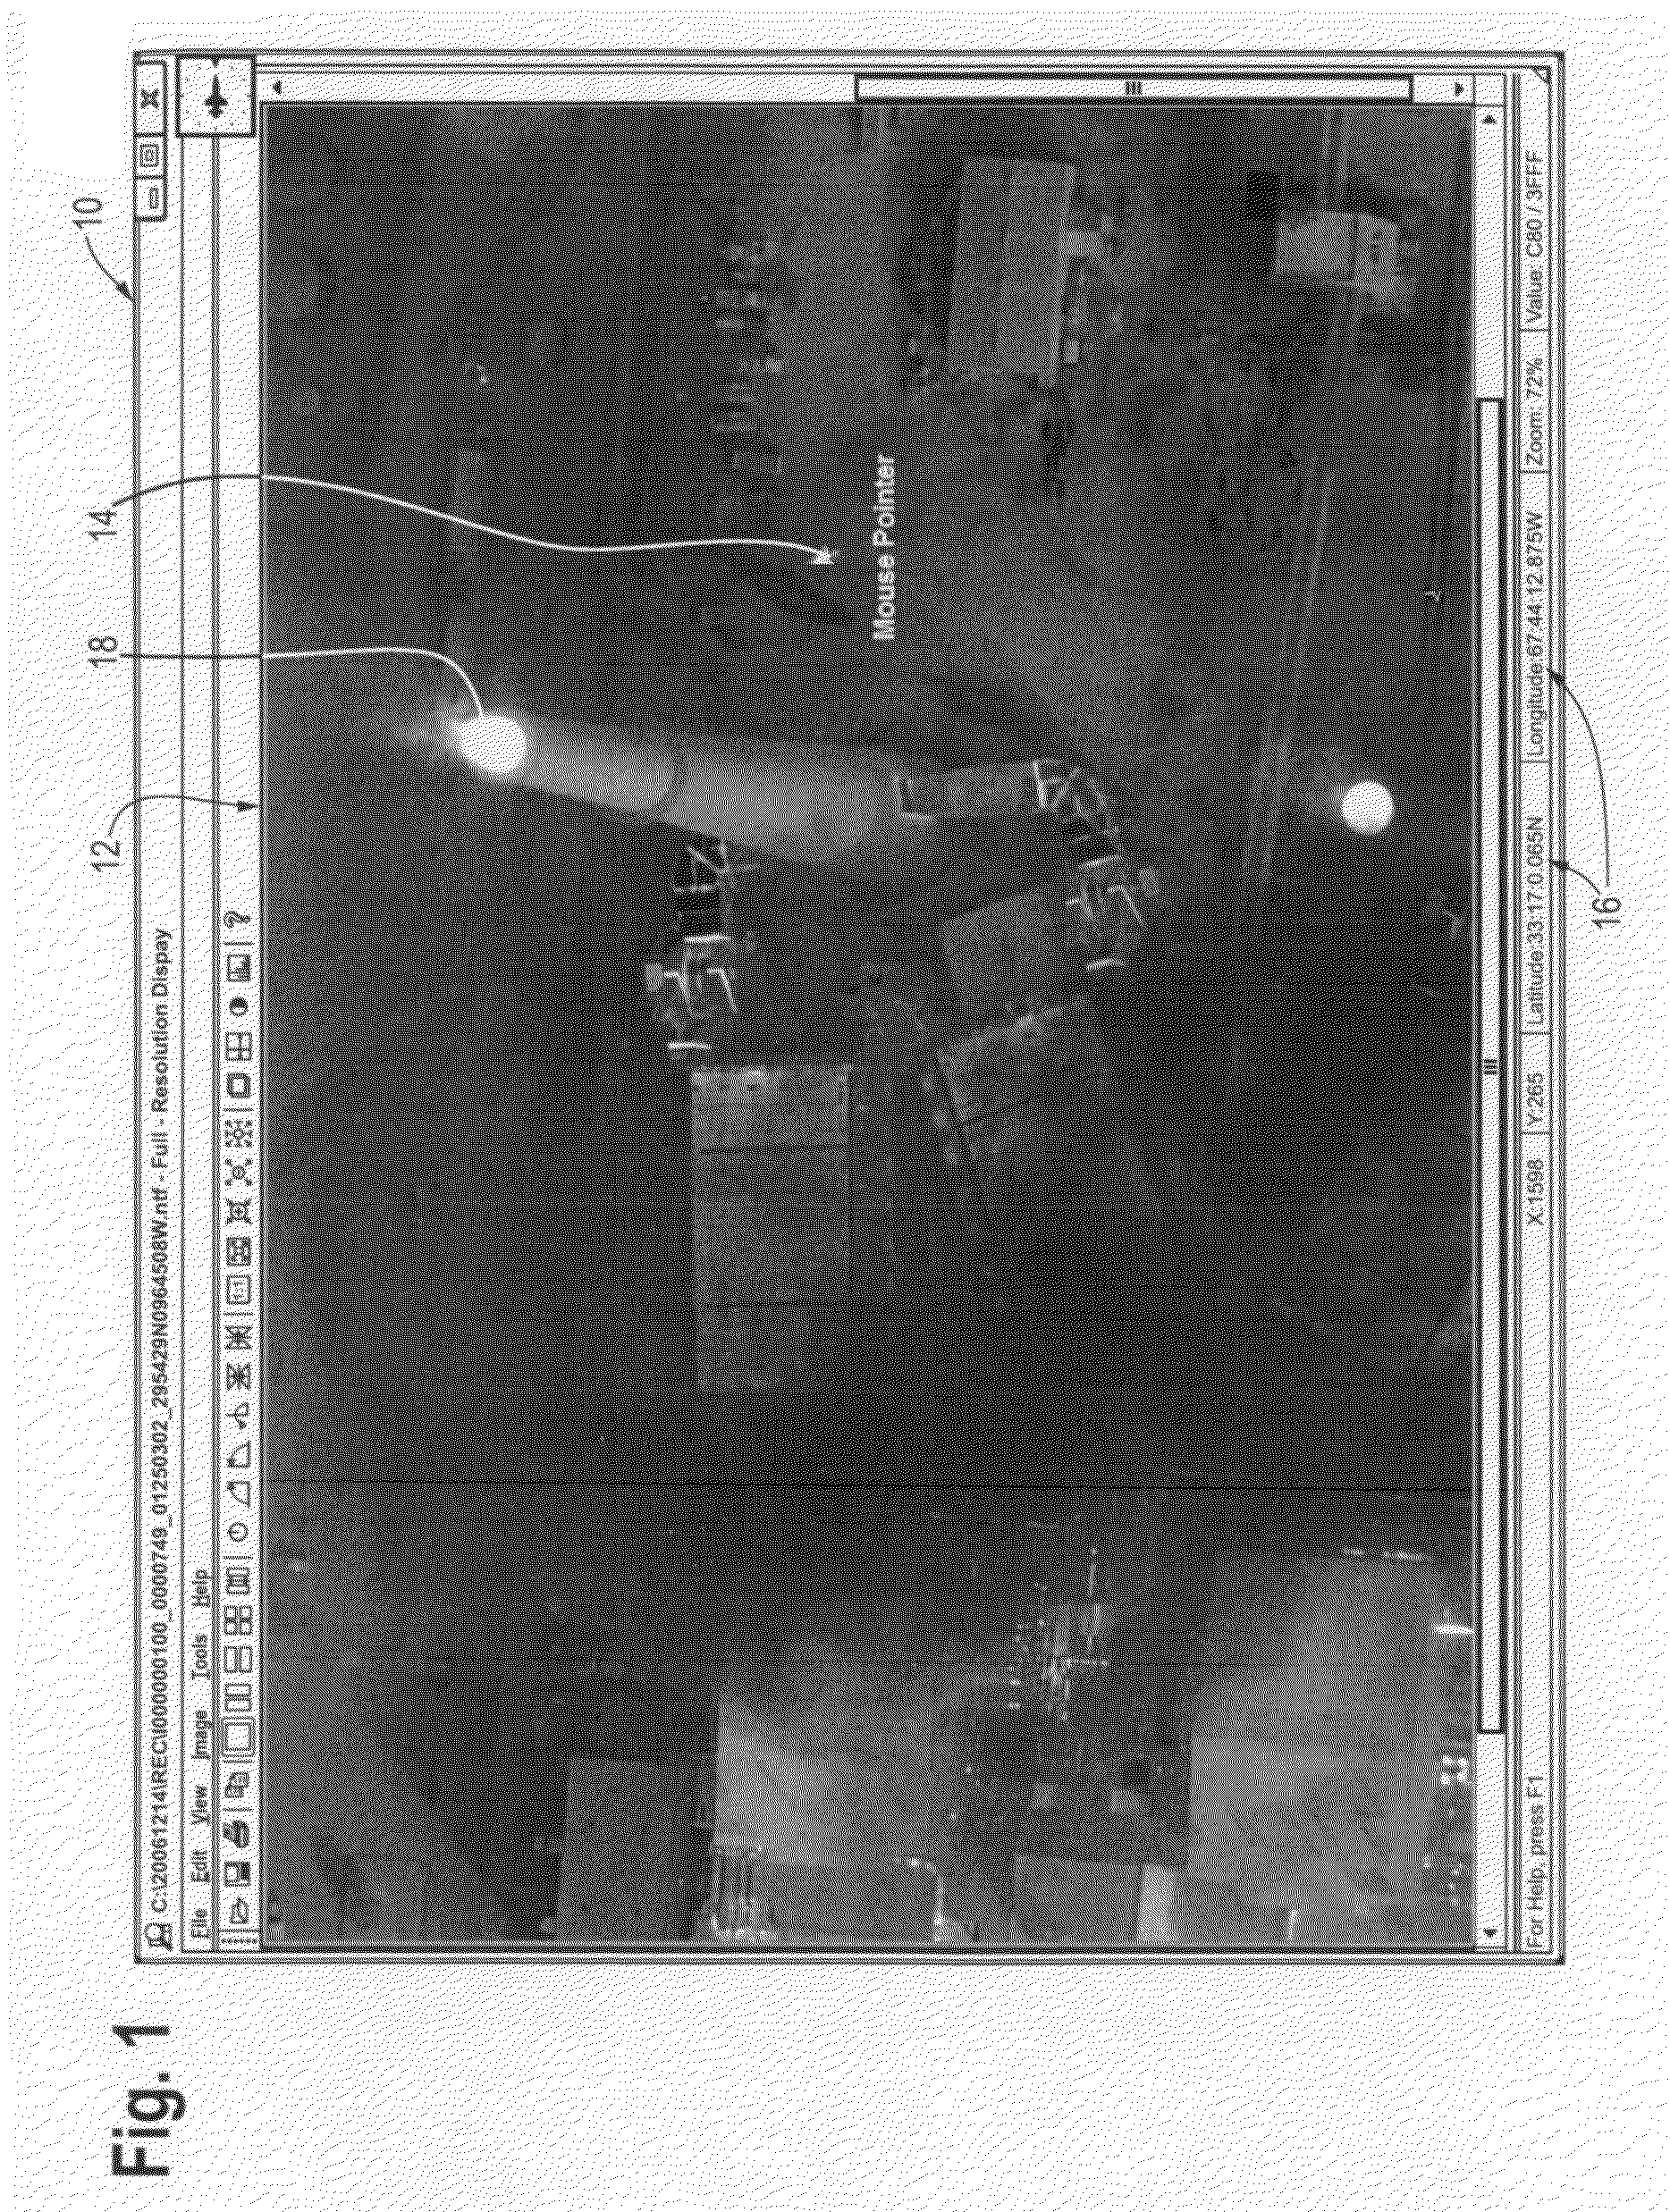 Method of object location in airborne imagery using recursive quad space image processing